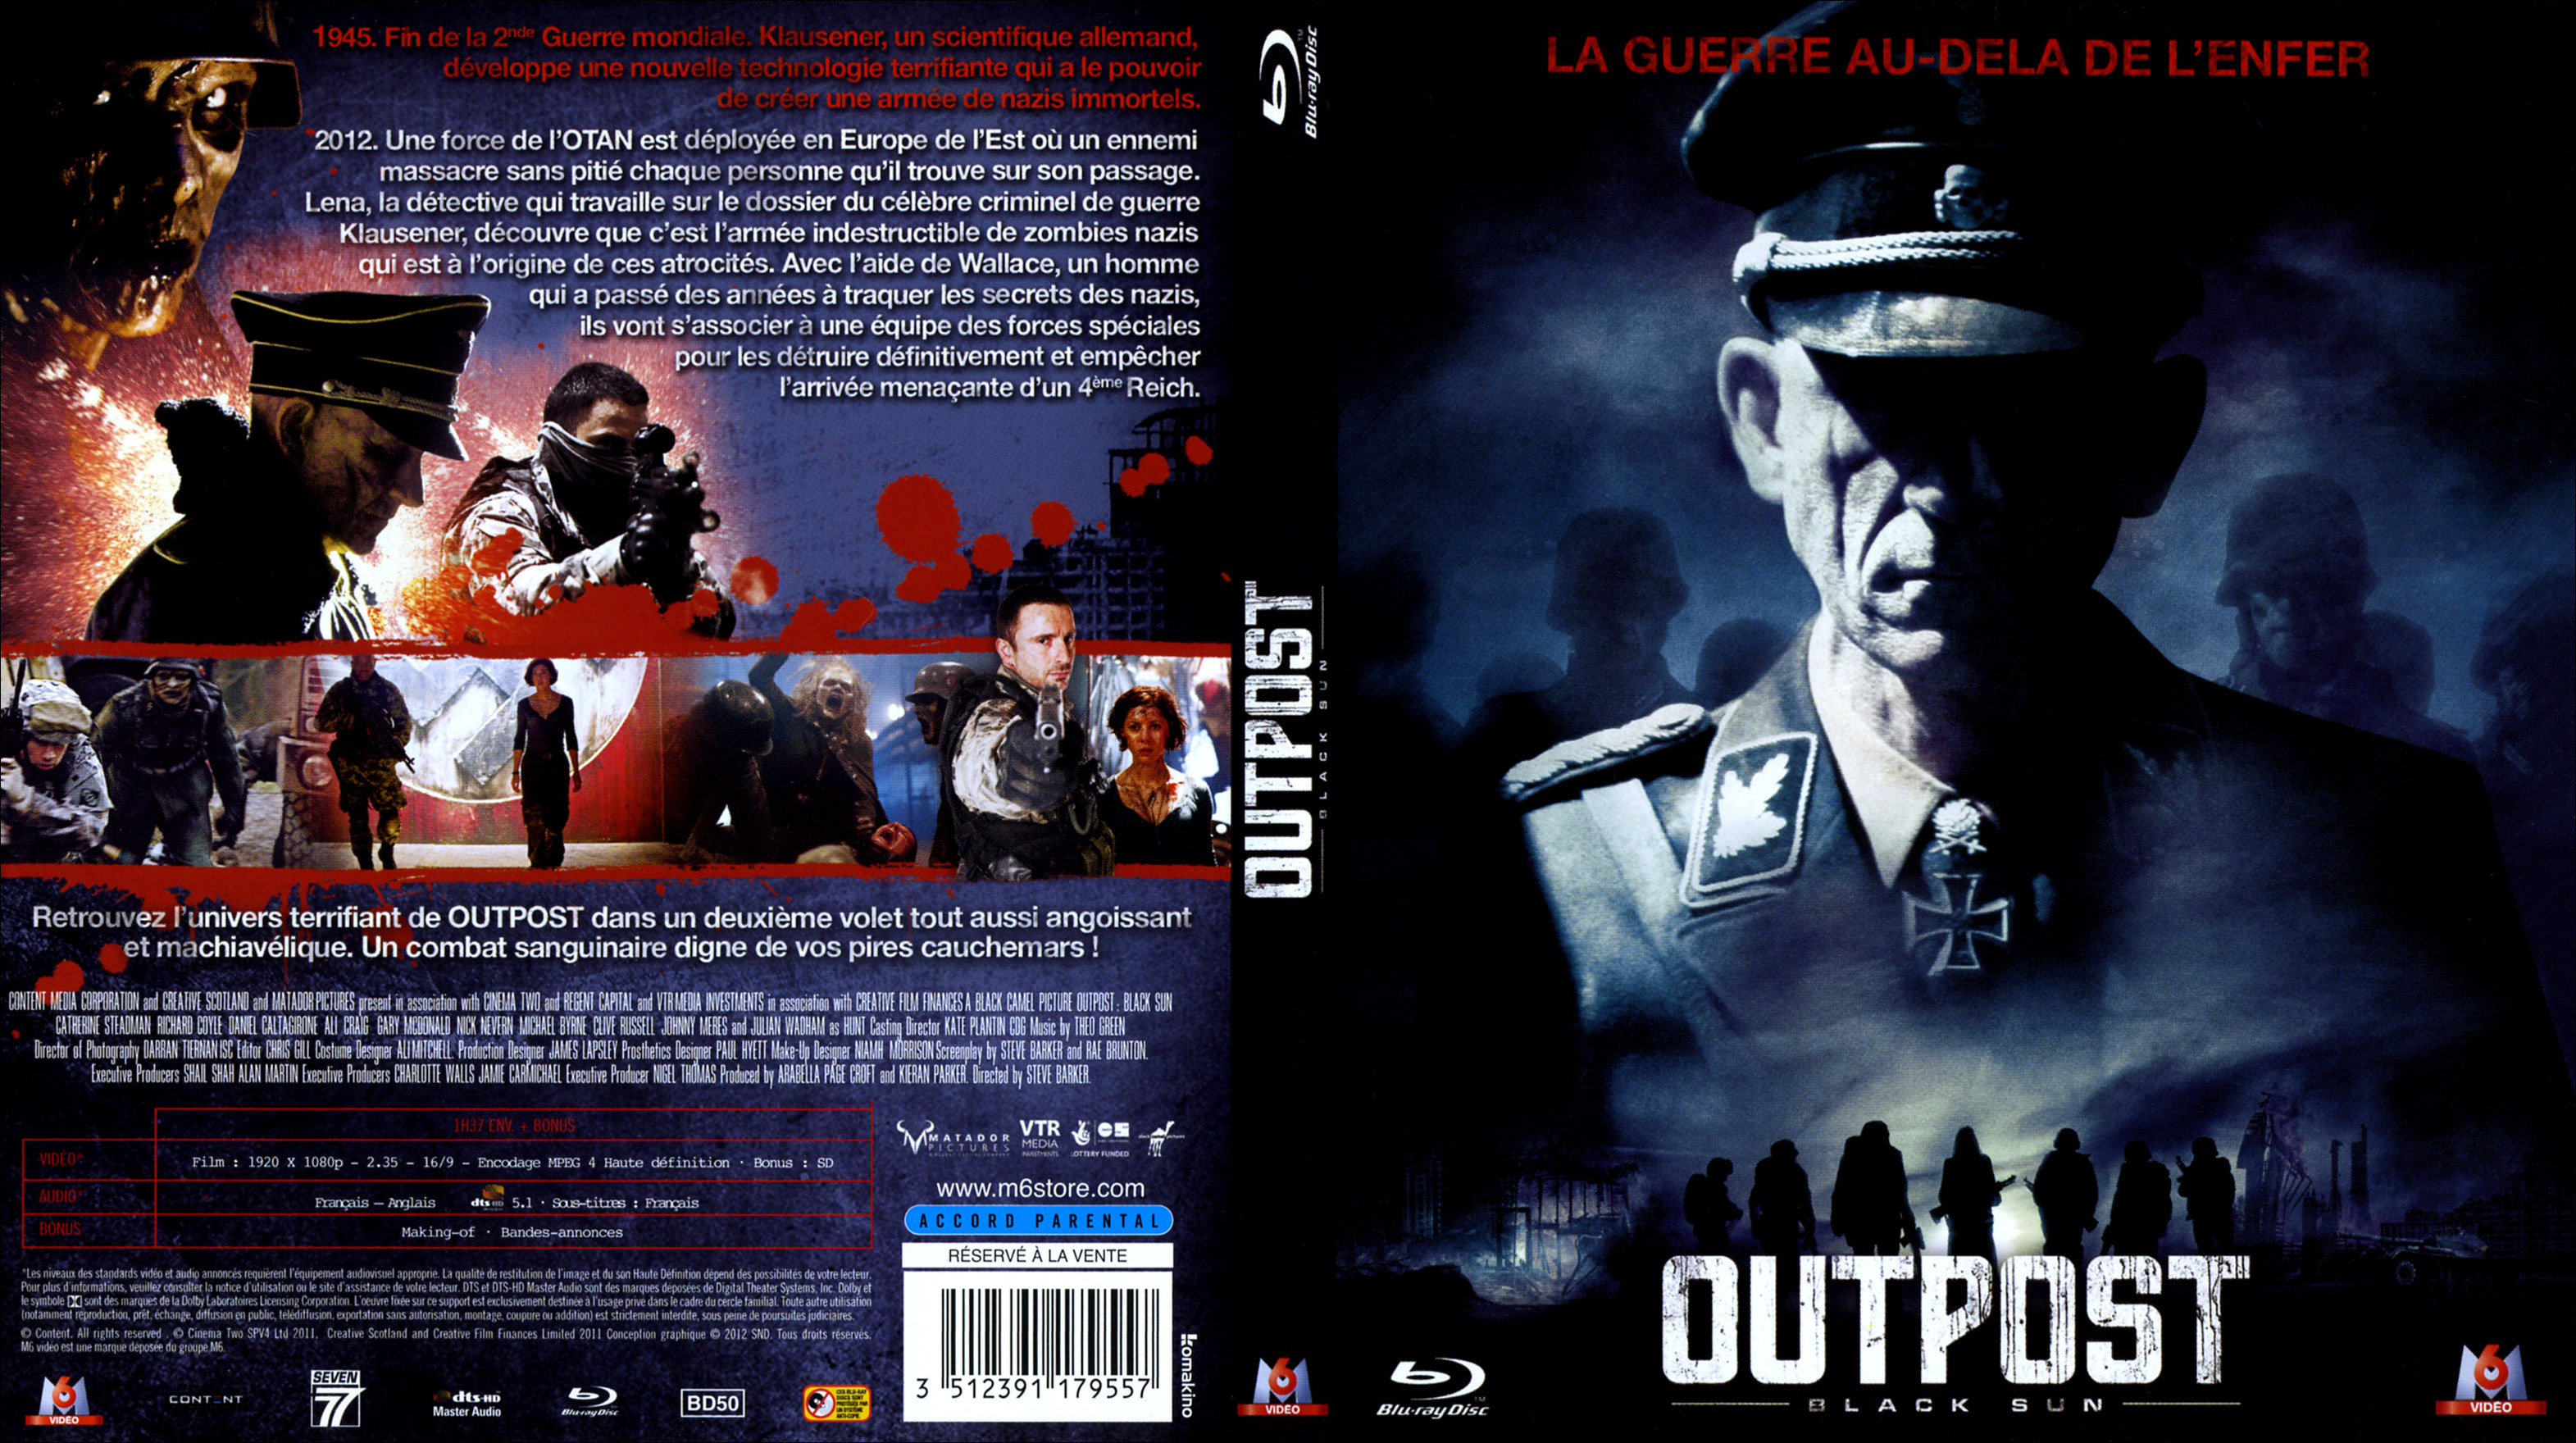 Jaquette DVD Outpost Black sun (BLU-RAY)